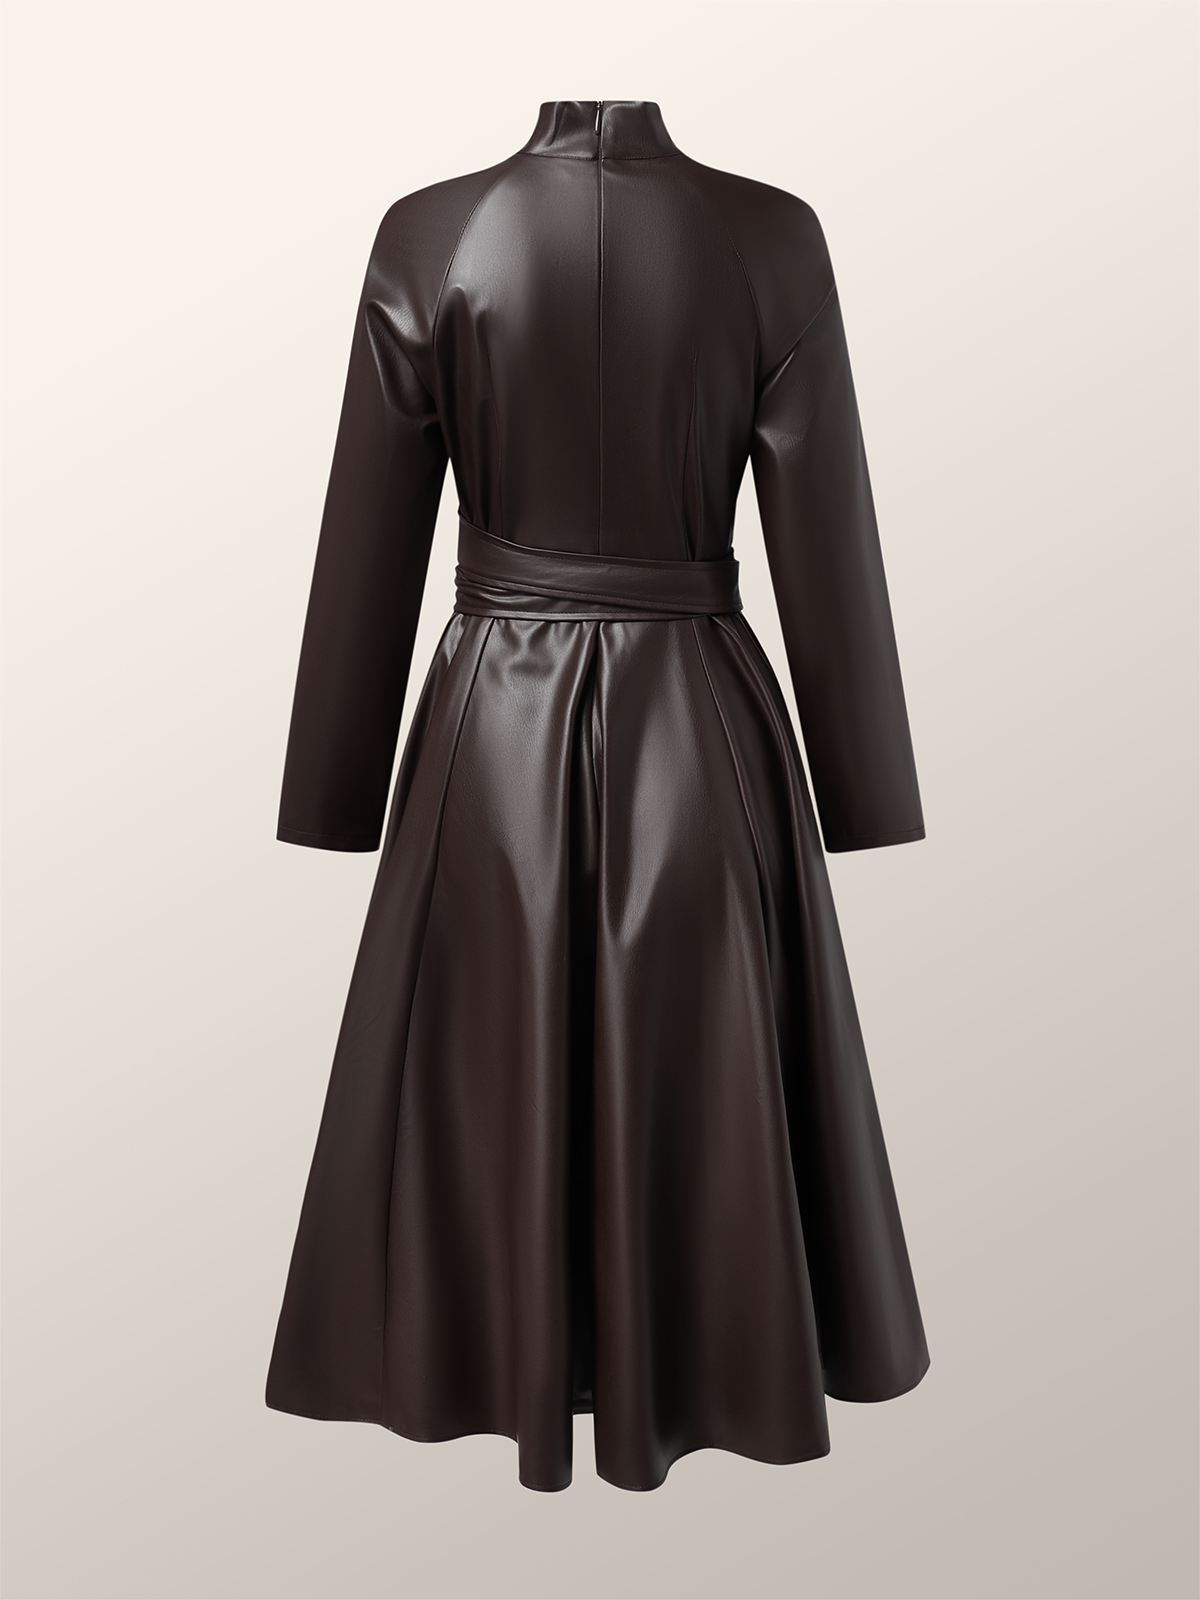 Micro-Elasticity Pu Elegant Stand Collar Long Sleeve Faux Leather Maxi Dress With Belt